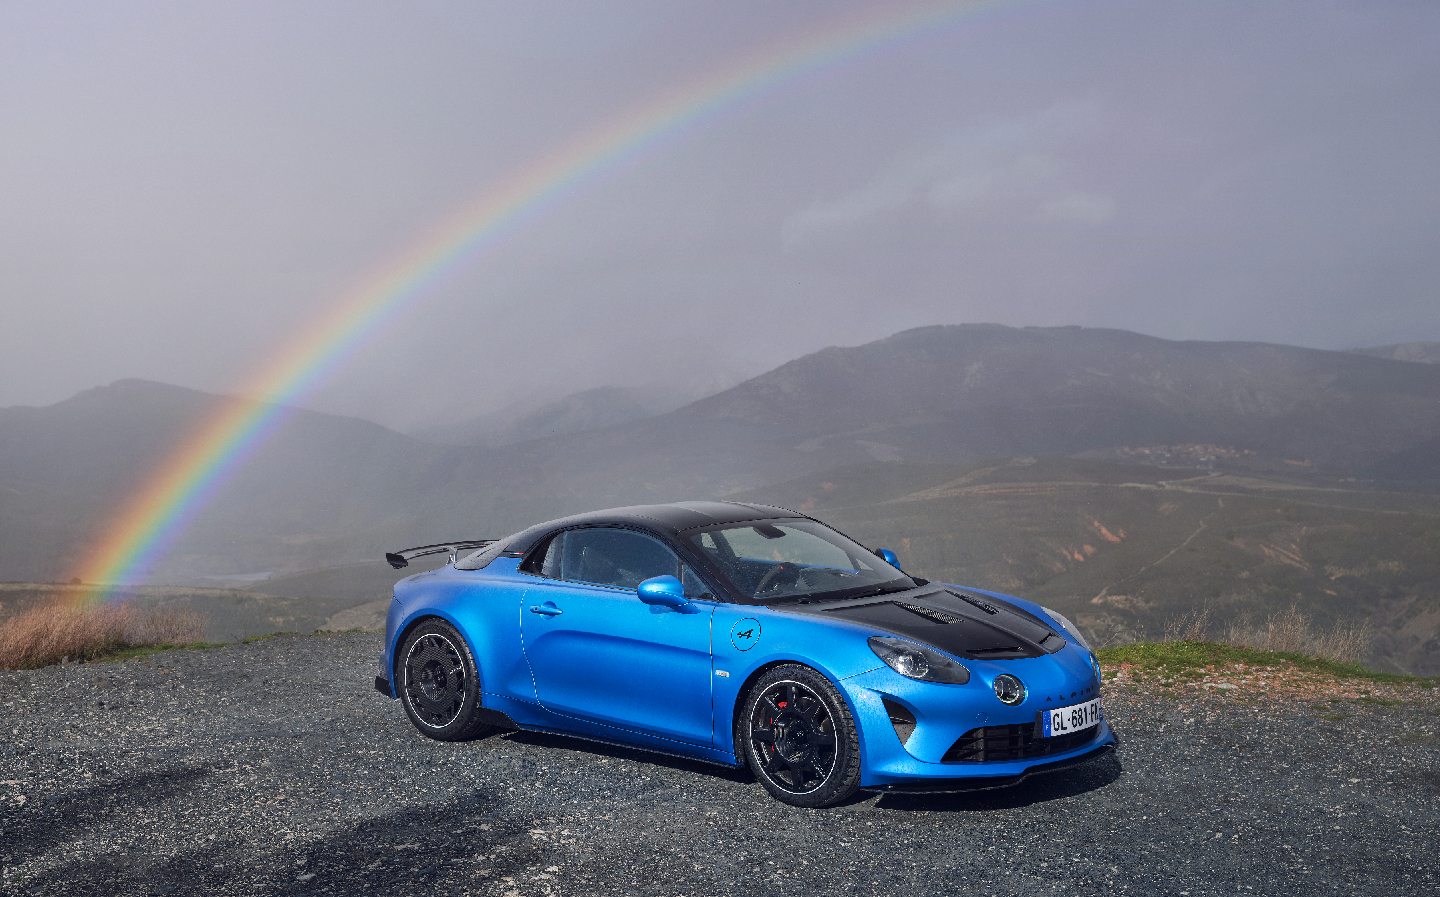 Alpine's New 'Fernando Alonso' Edition of the A110 R Costs